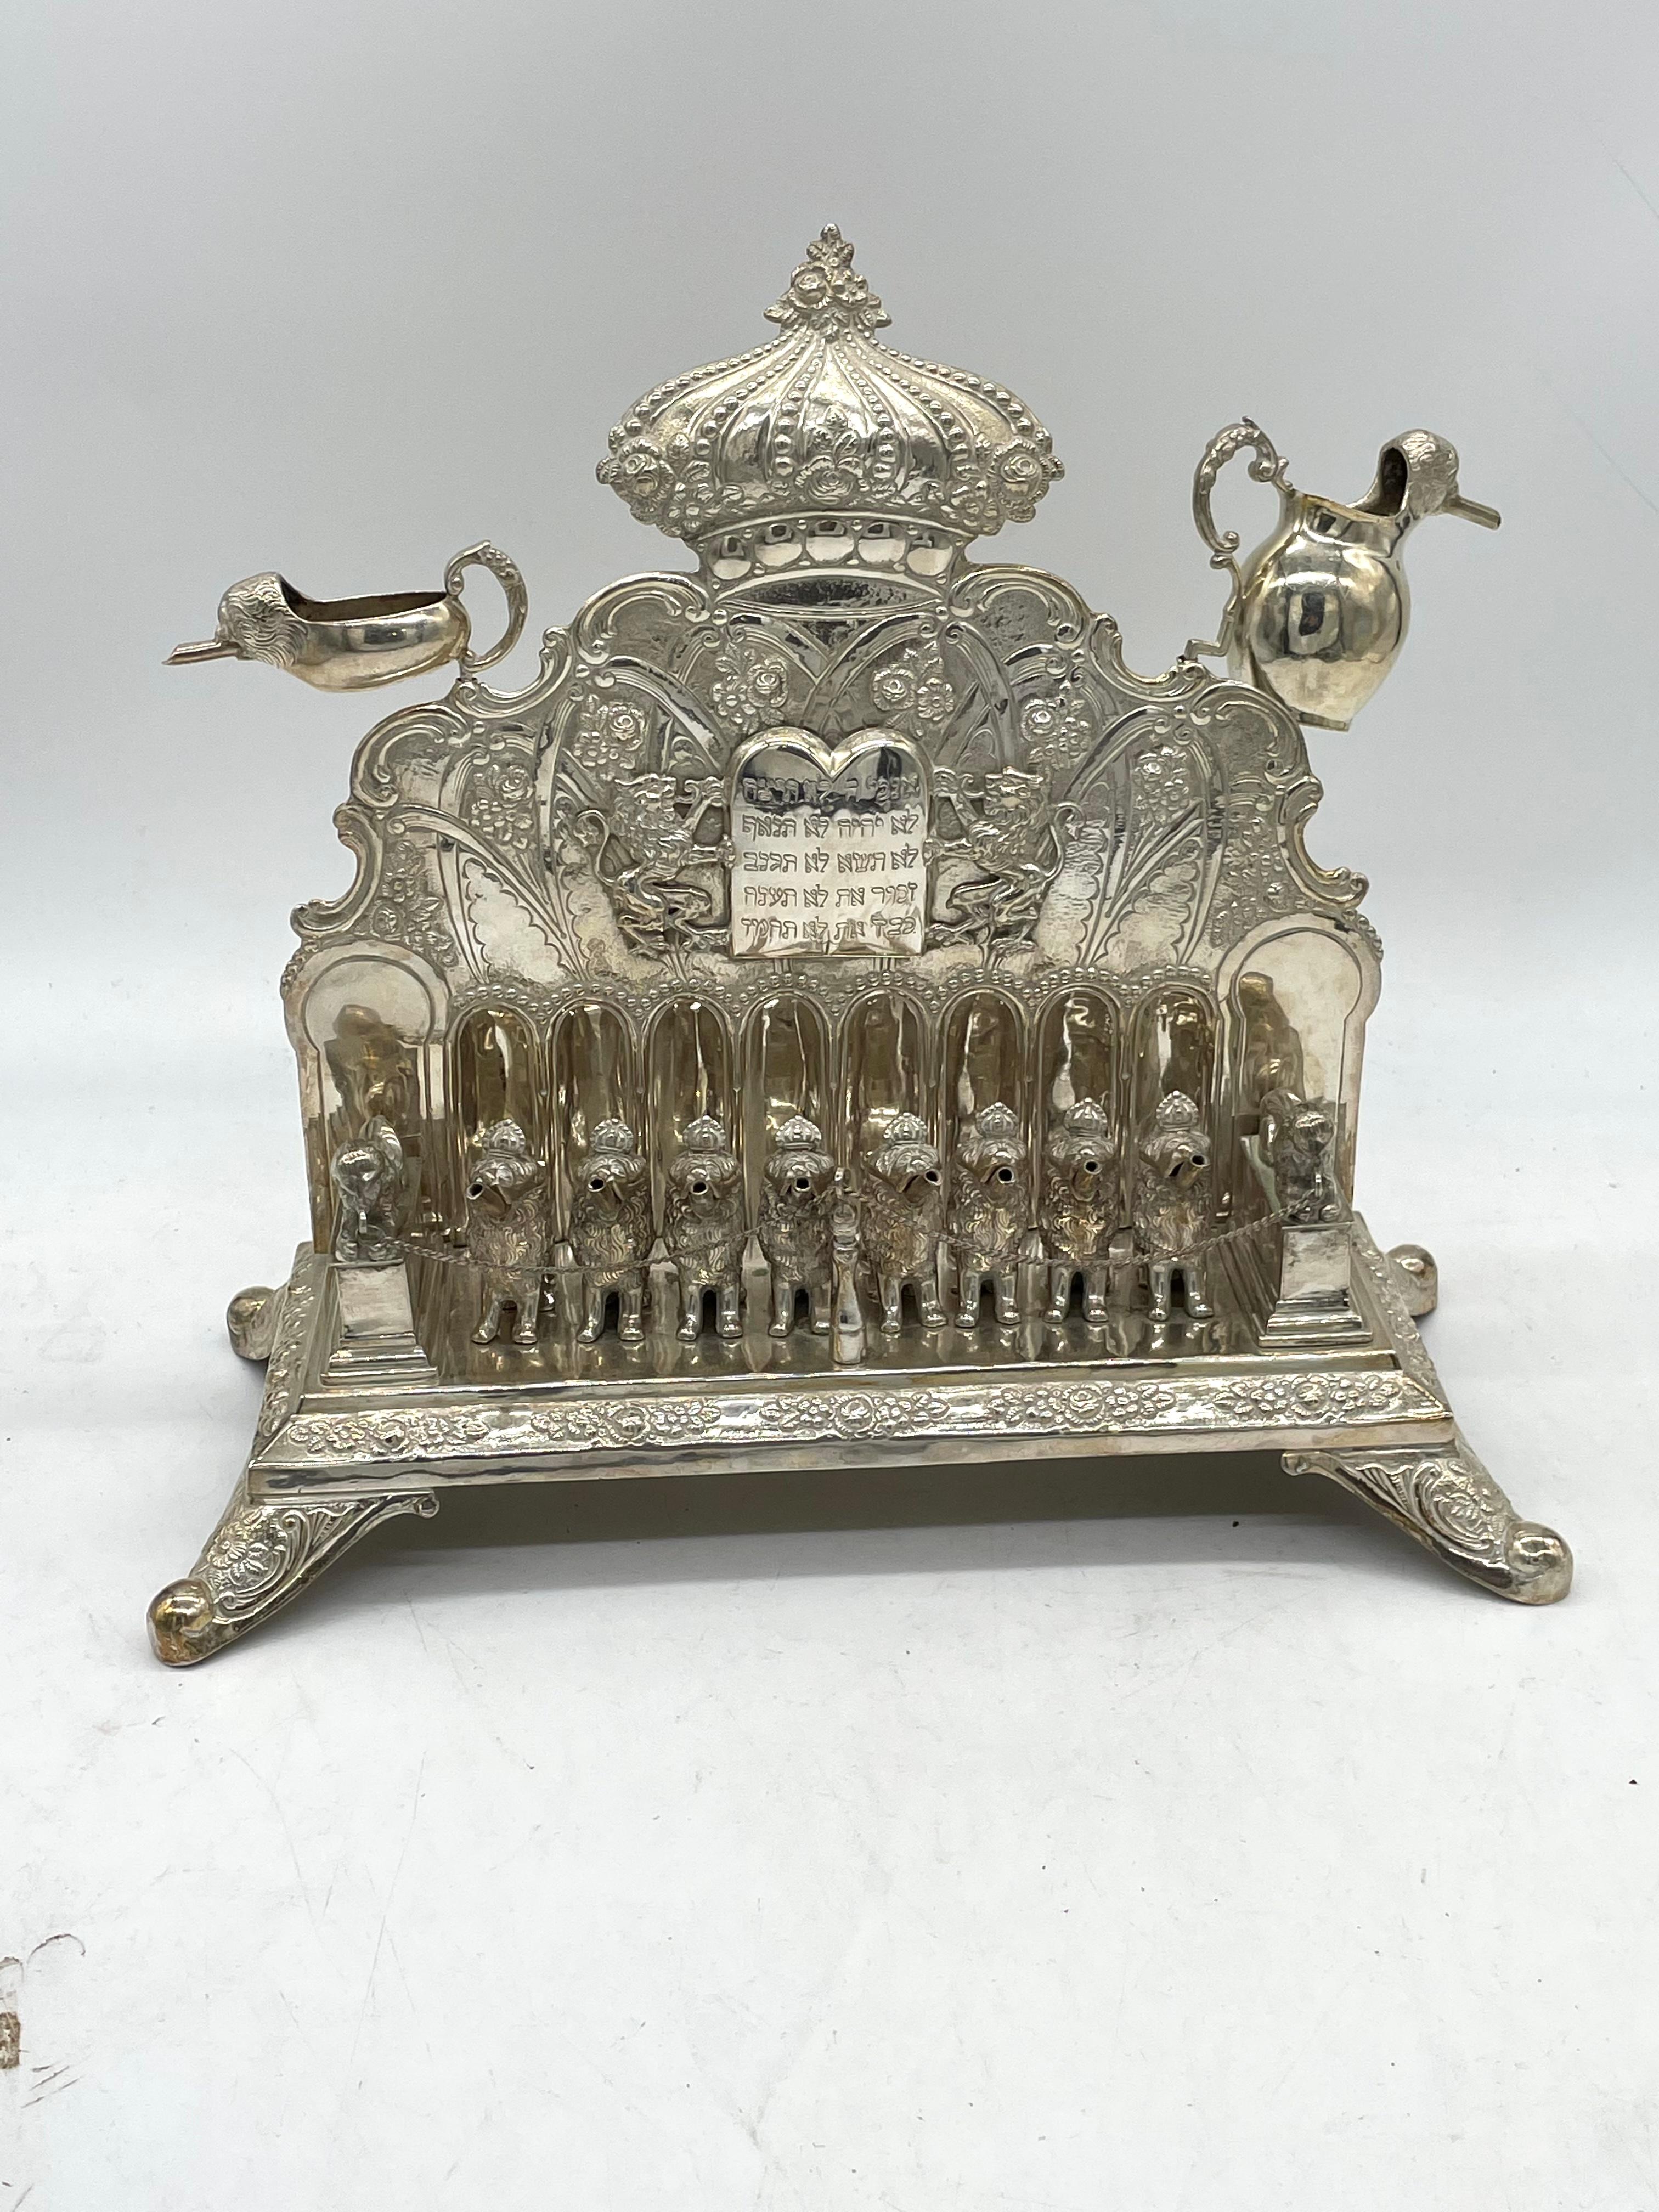 German silver hanukkah lamp made in 1880 features nine decorated candleholders in the form of seated lions. The lion figures each have a vivid representation showcasing realistic craftsmanship. The lion figures have a detachable feature for burning